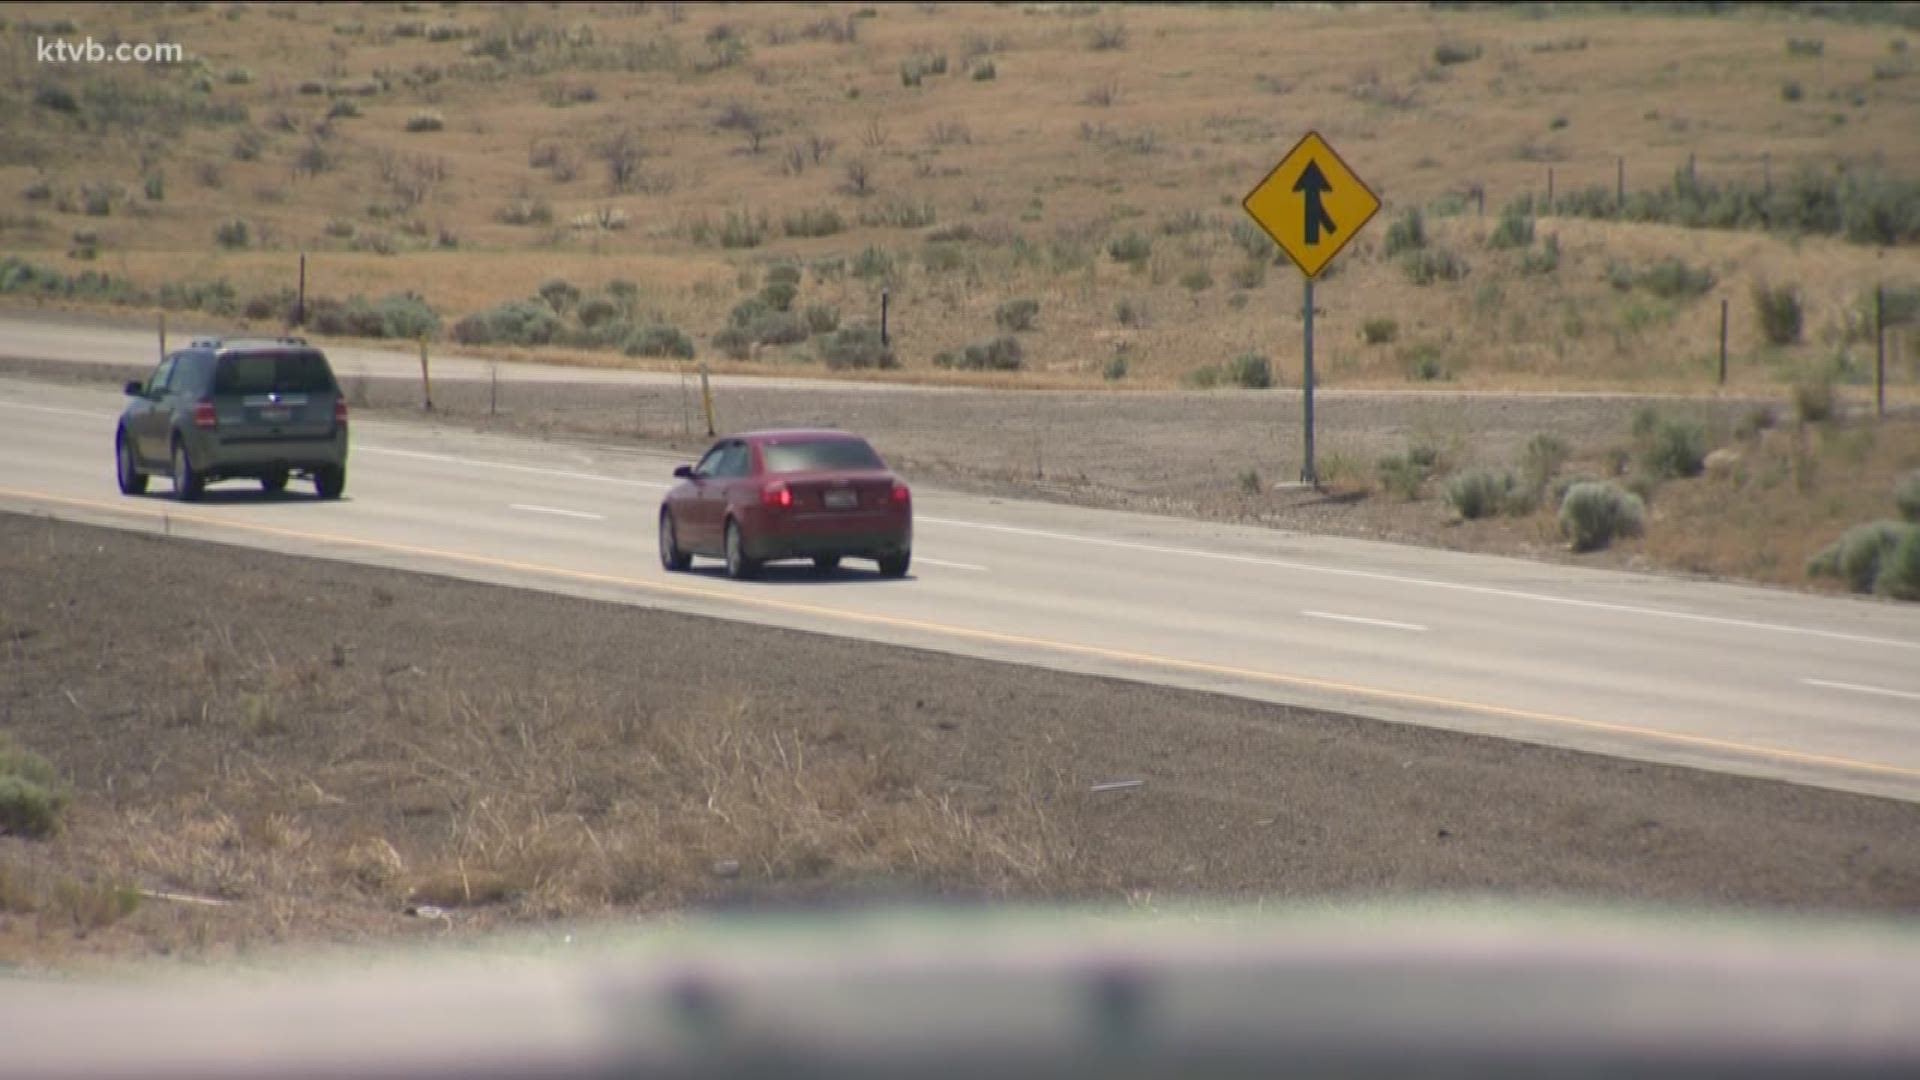 Driving too slow in the left lane could get you a ticket.